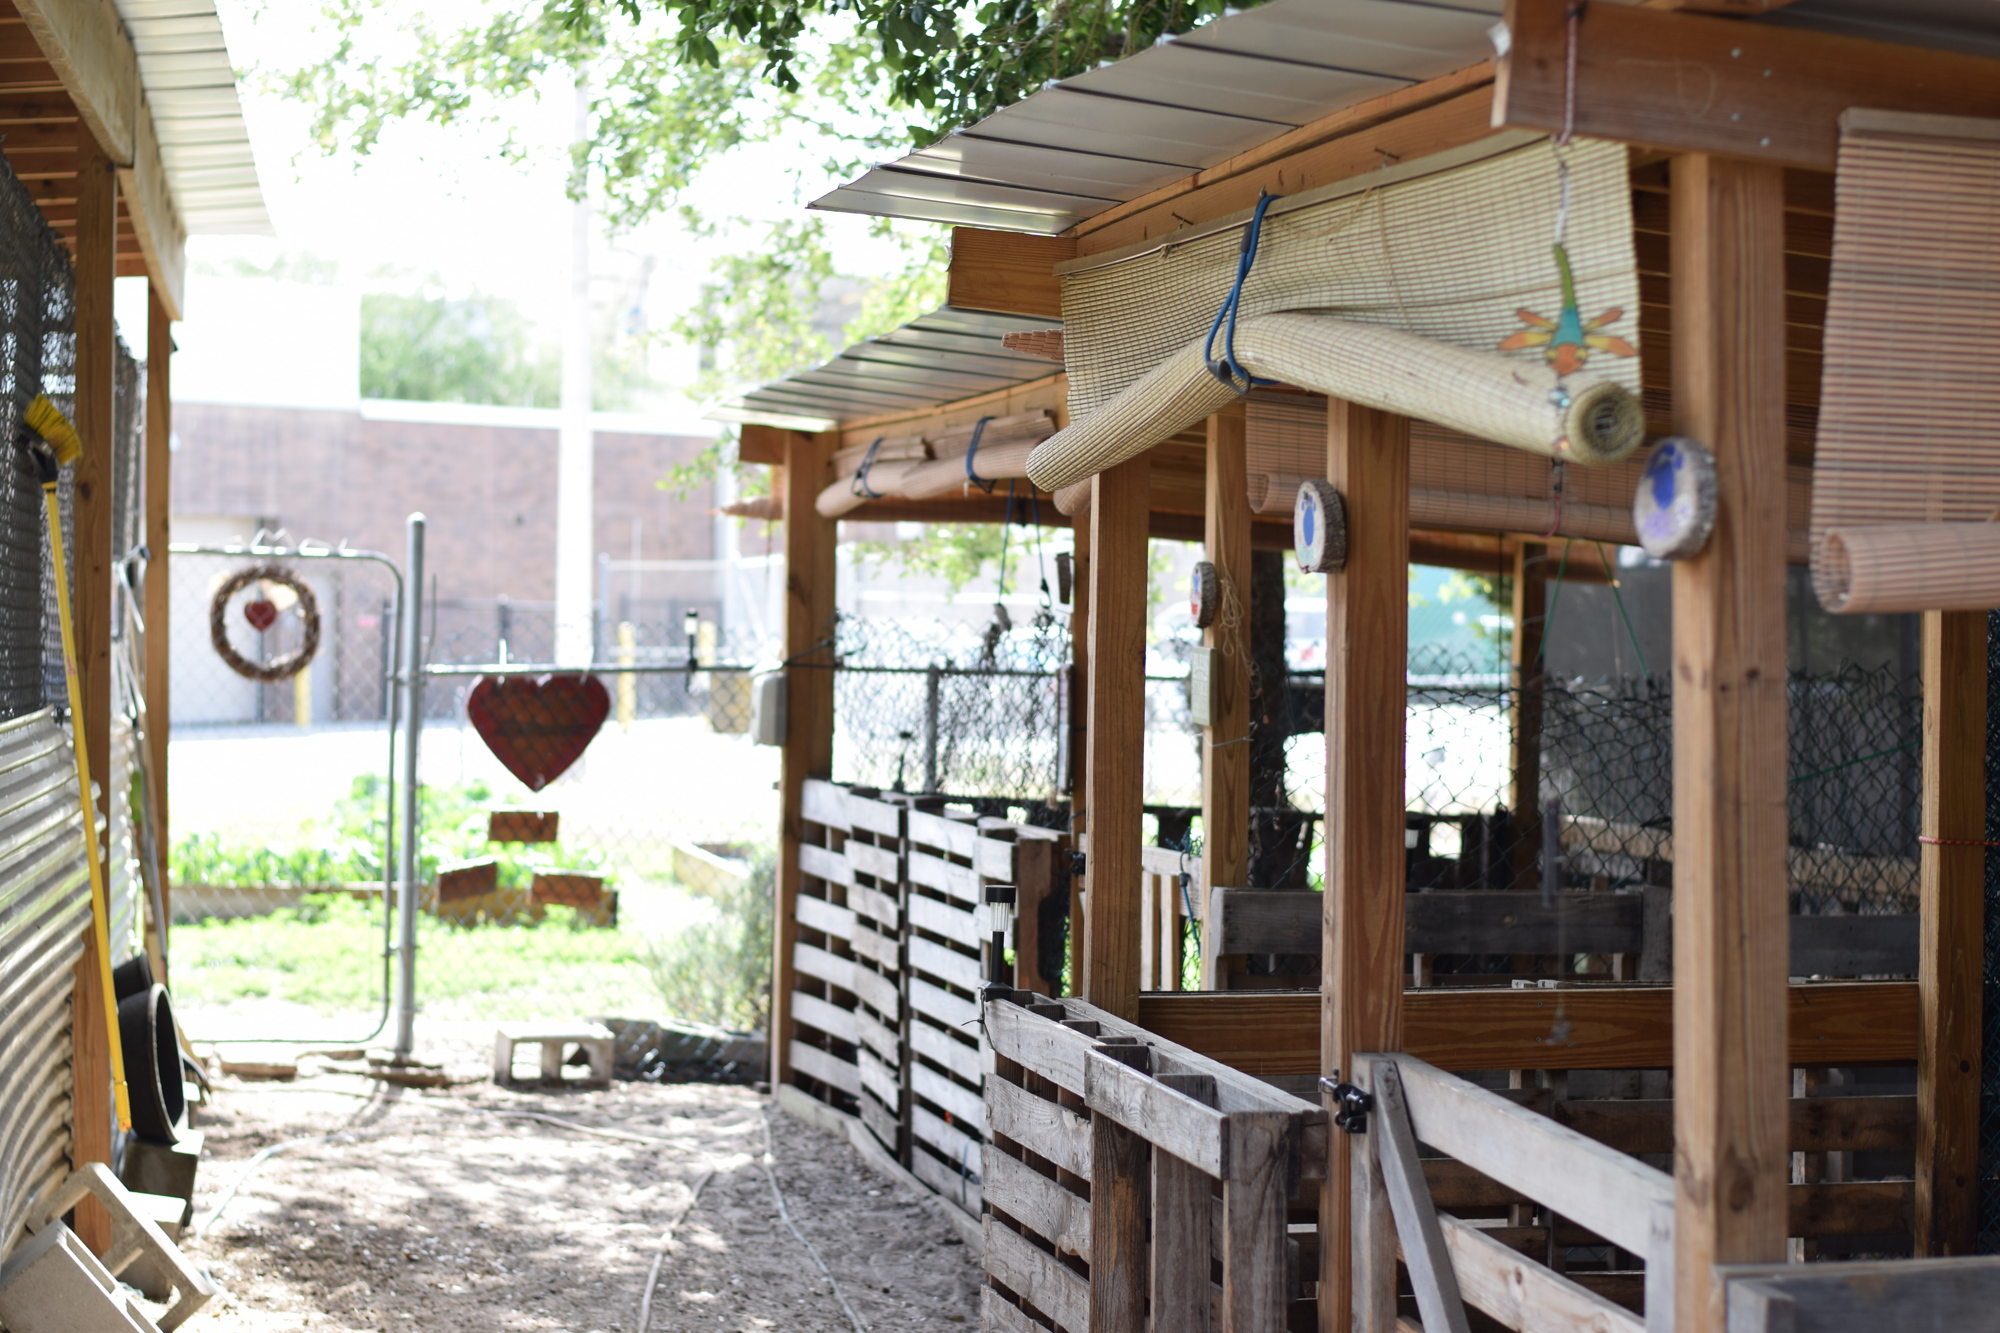 The ESE classes at Dr. Phillips High School help maintain the Special Hearts Farm and care for its animals.